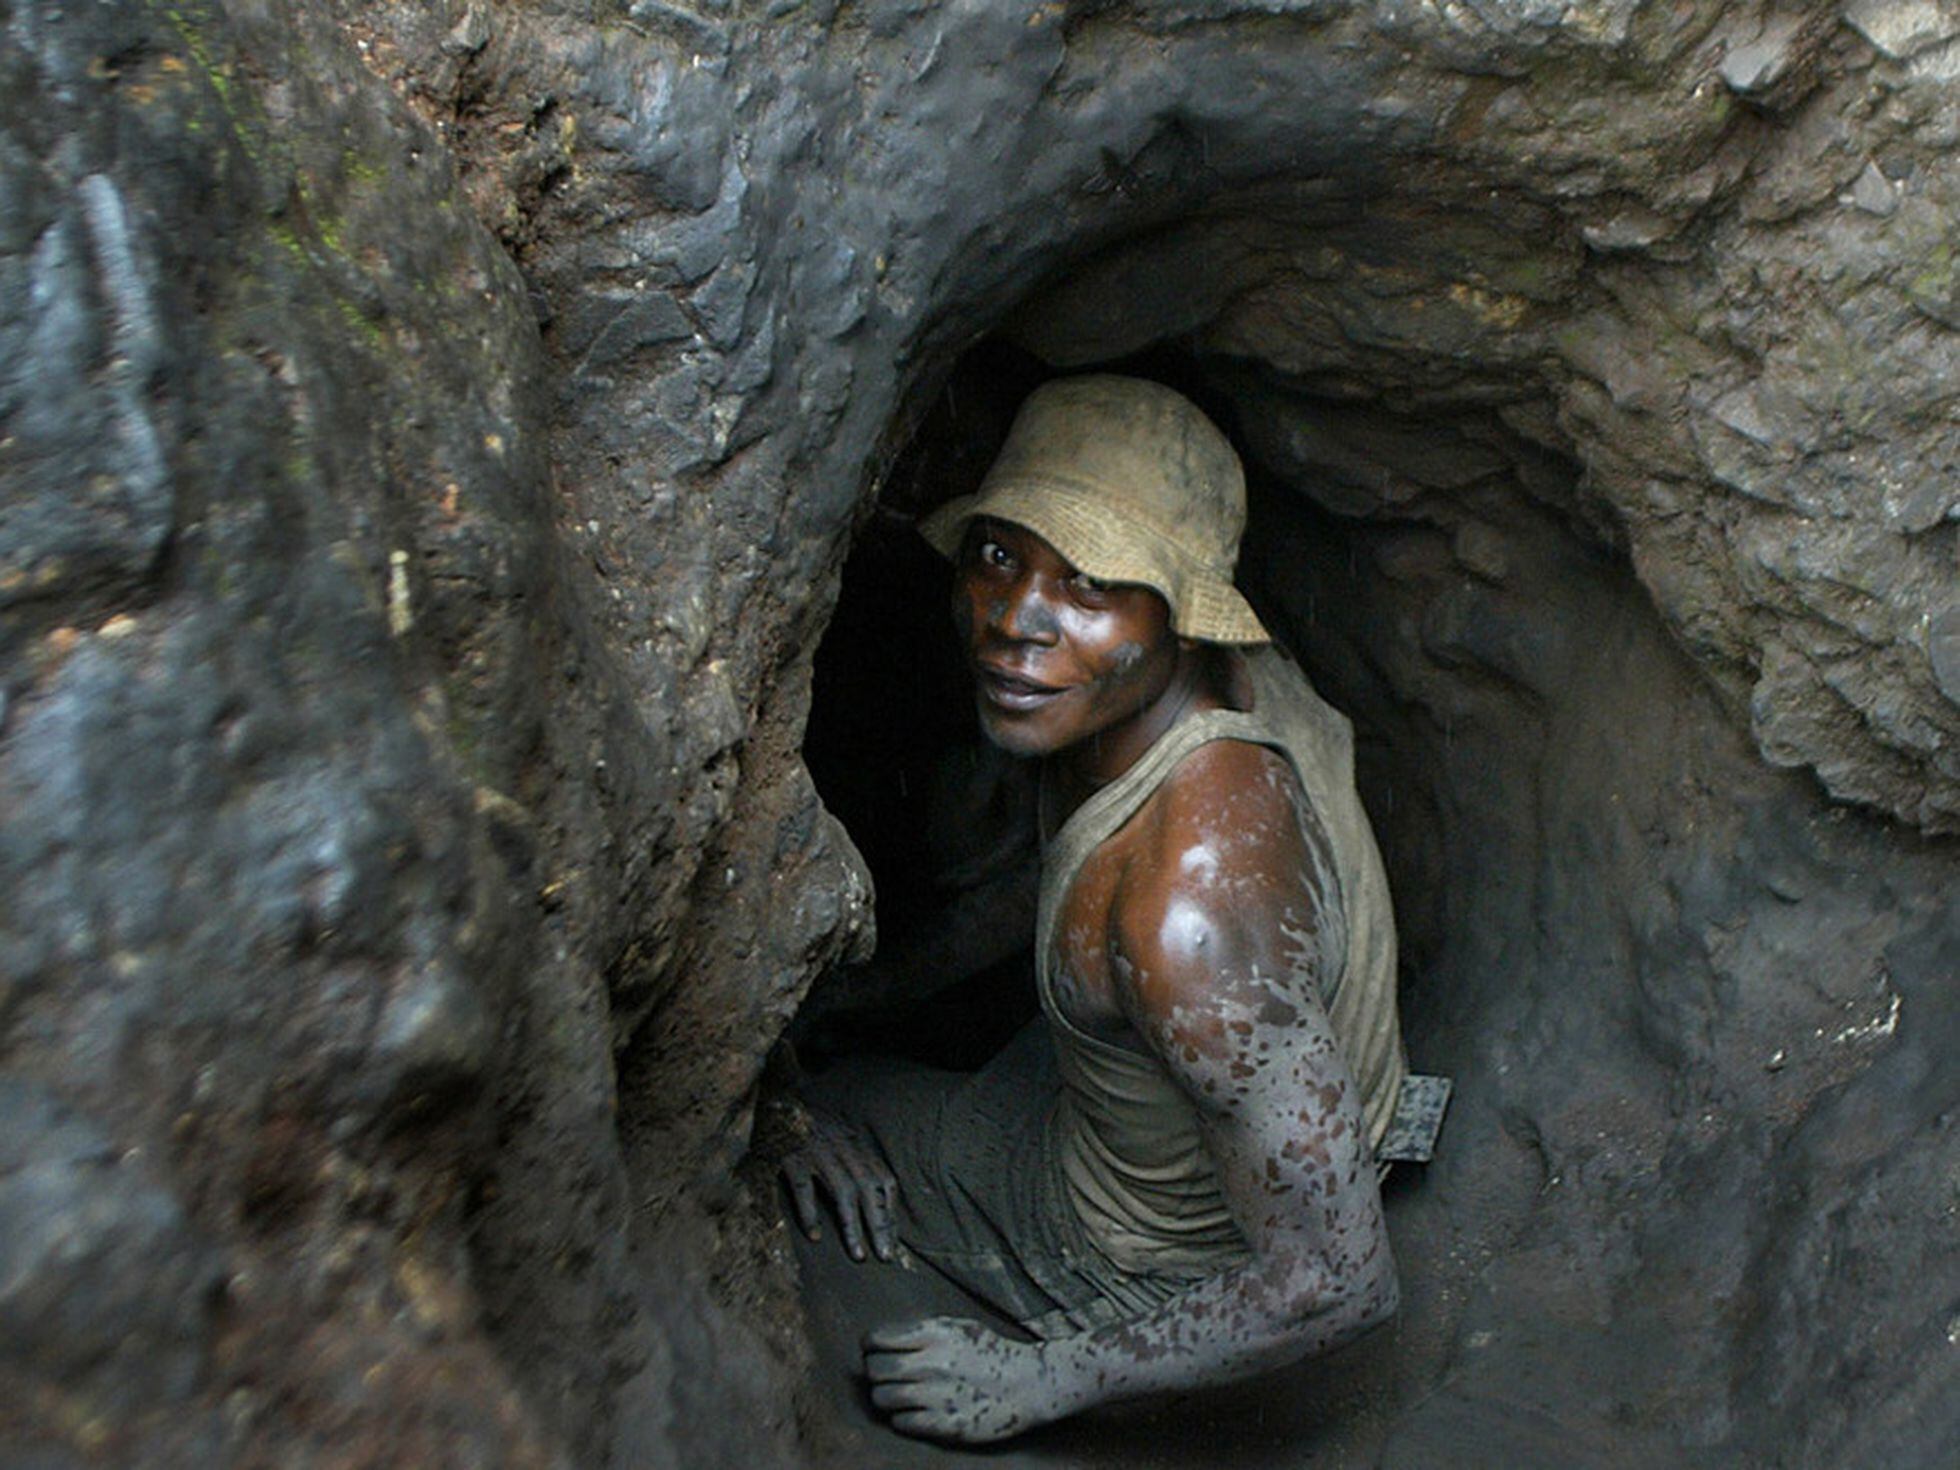 Will the 'new crude oil,' cobalt, change Africa's future?